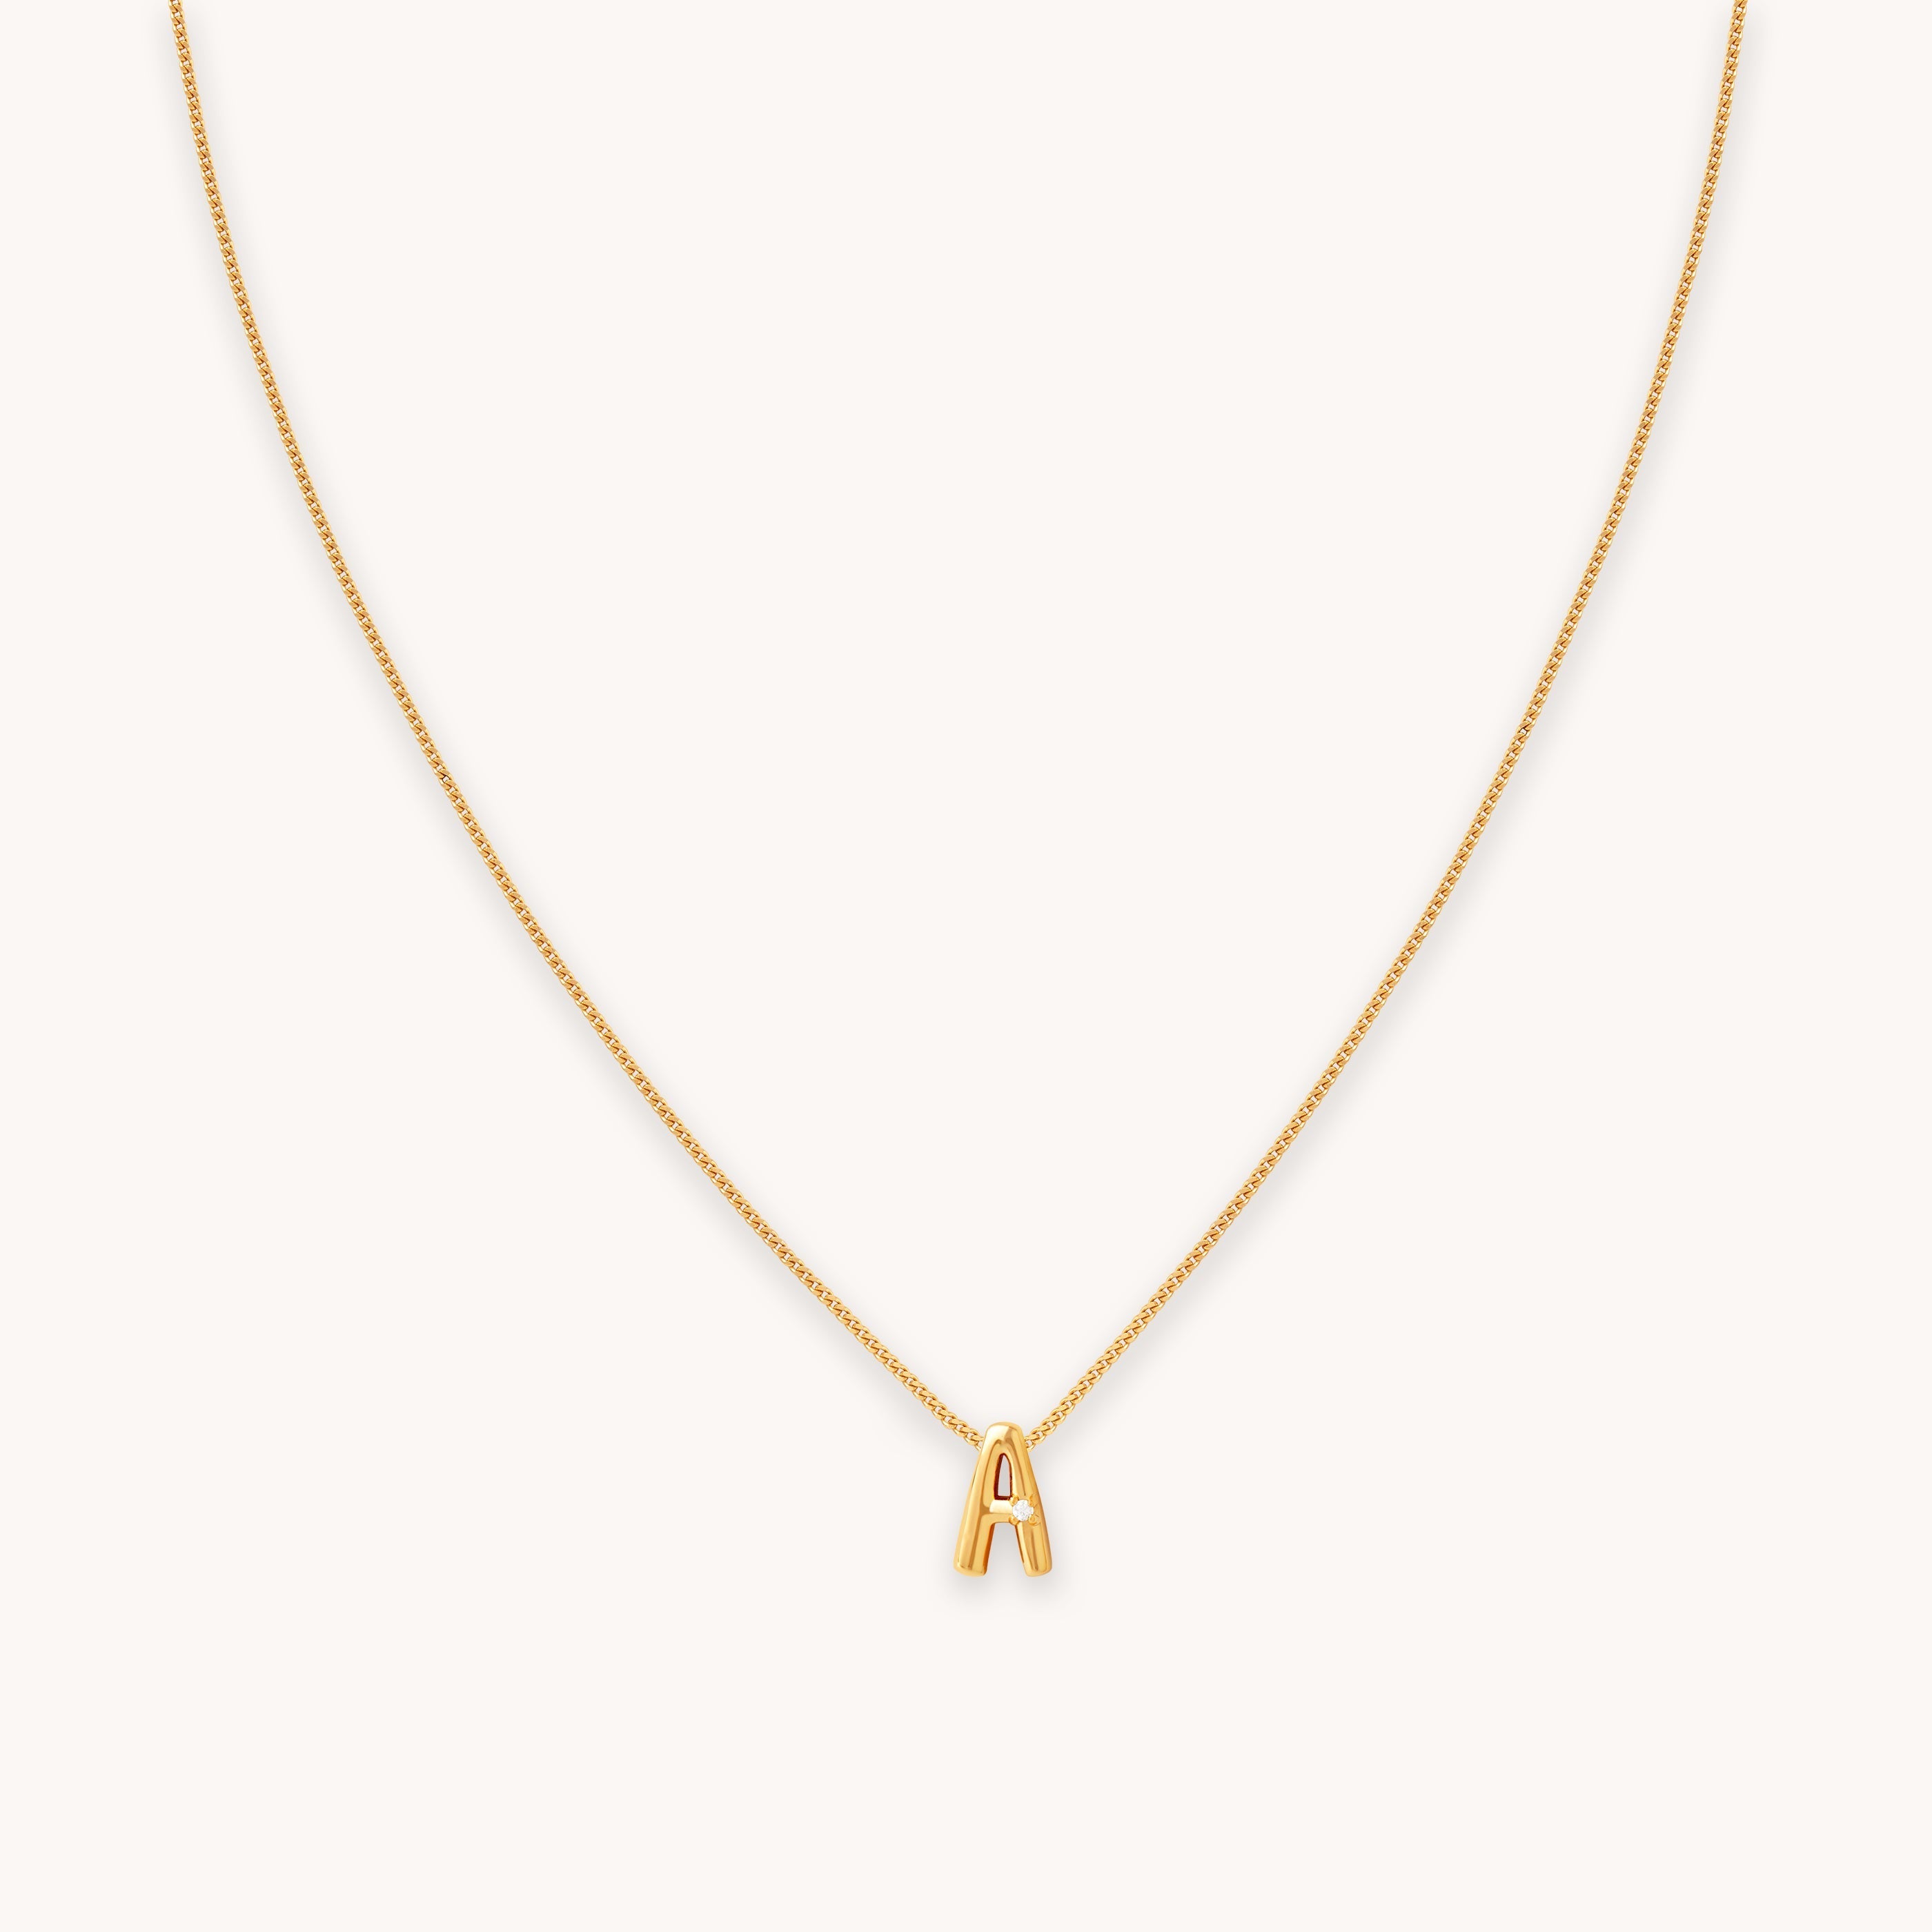 A Gold Initial Pendant Necklace | Astrid & Miyu Necklaces